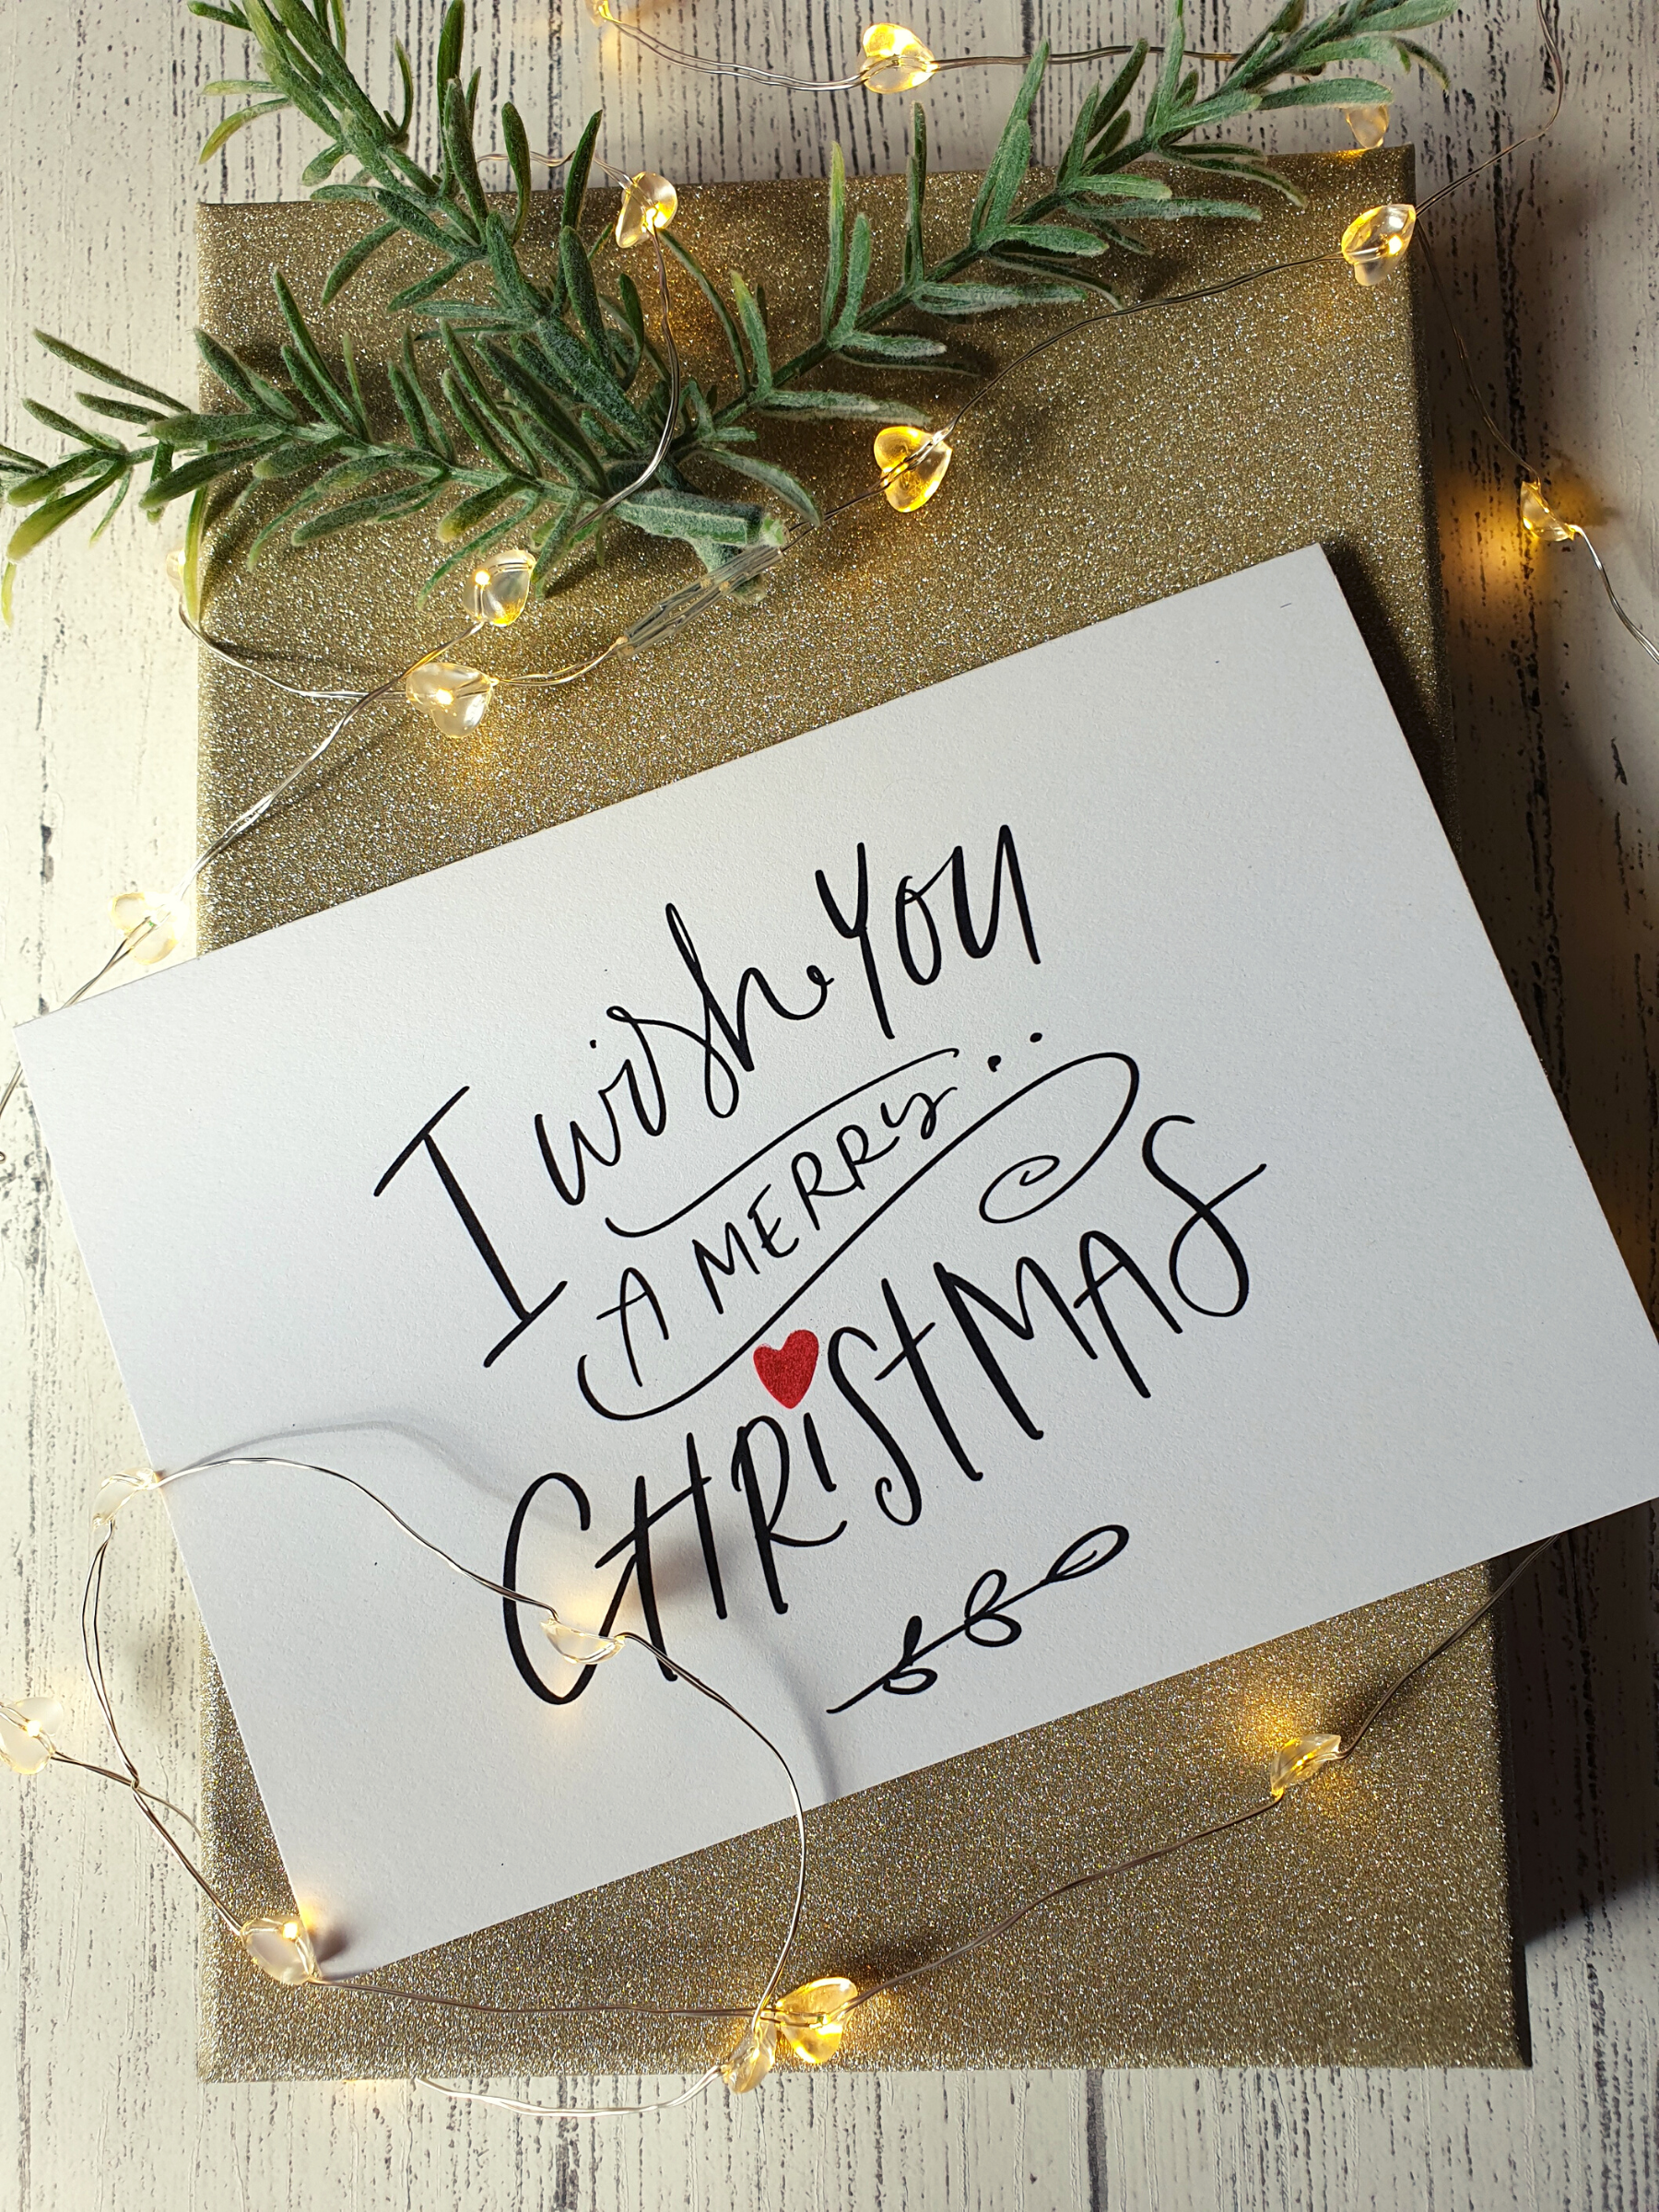 Poppleberry A6 Size 'Wish You a Merry Christmas' Red Heart Calligraphy Folded Christmas Card.